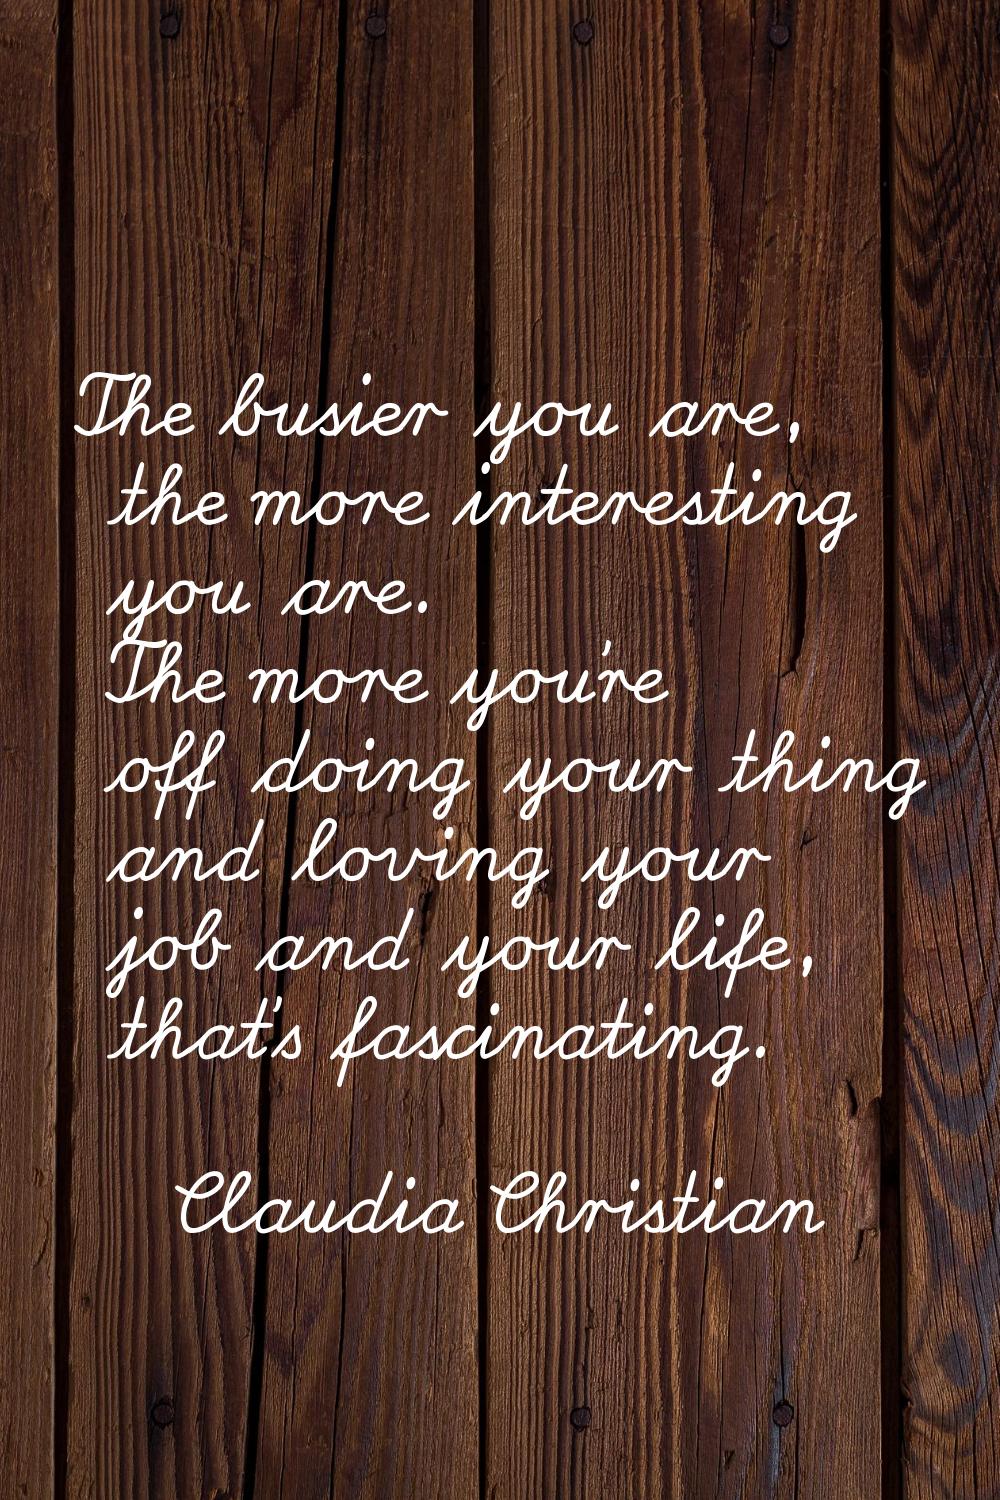 The busier you are, the more interesting you are. The more you're off doing your thing and loving y